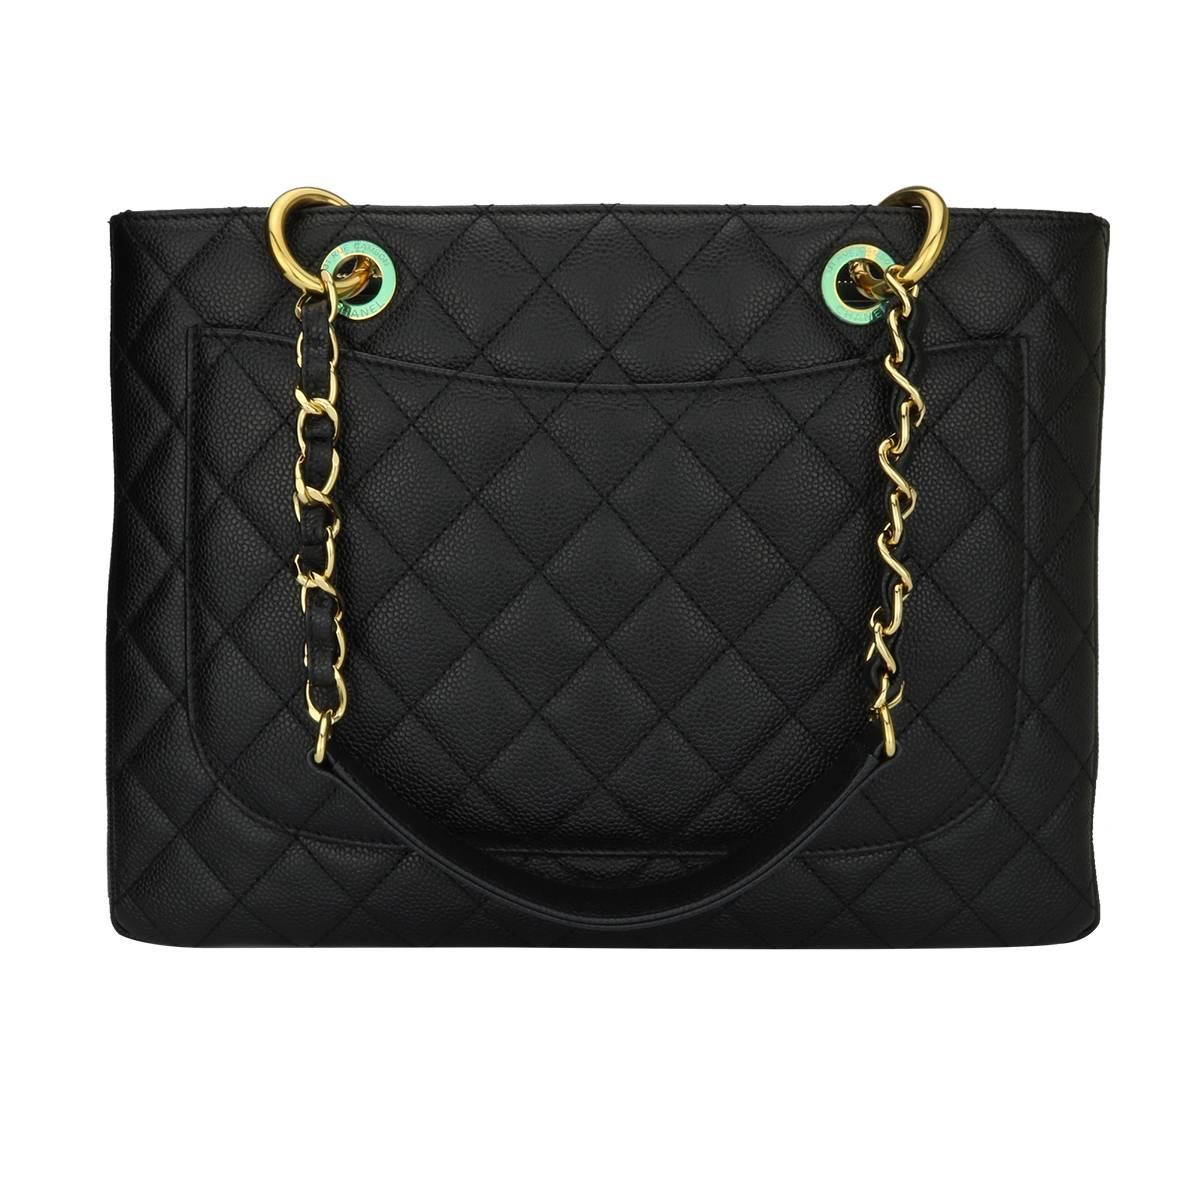 chanel gst black with gold hardware